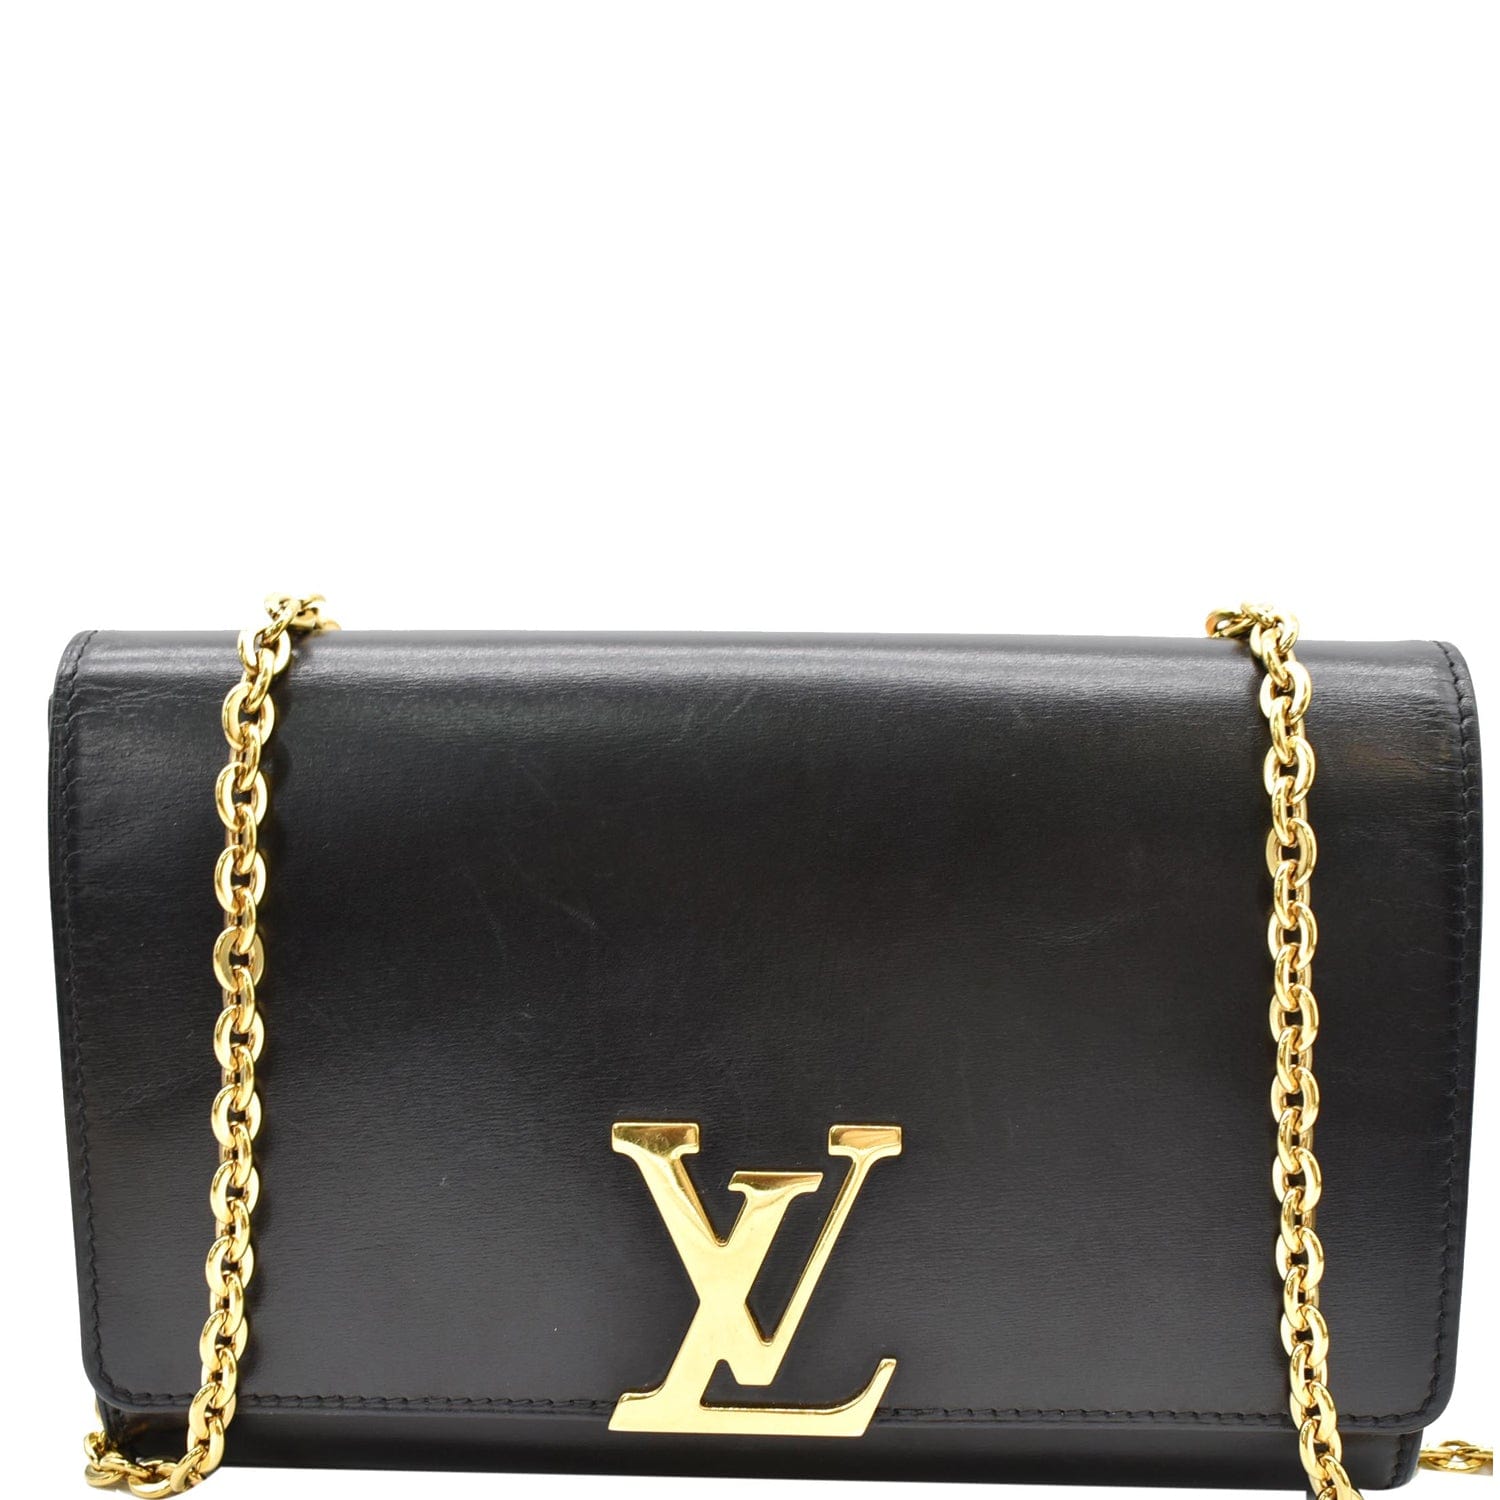 lv wallet on chain price